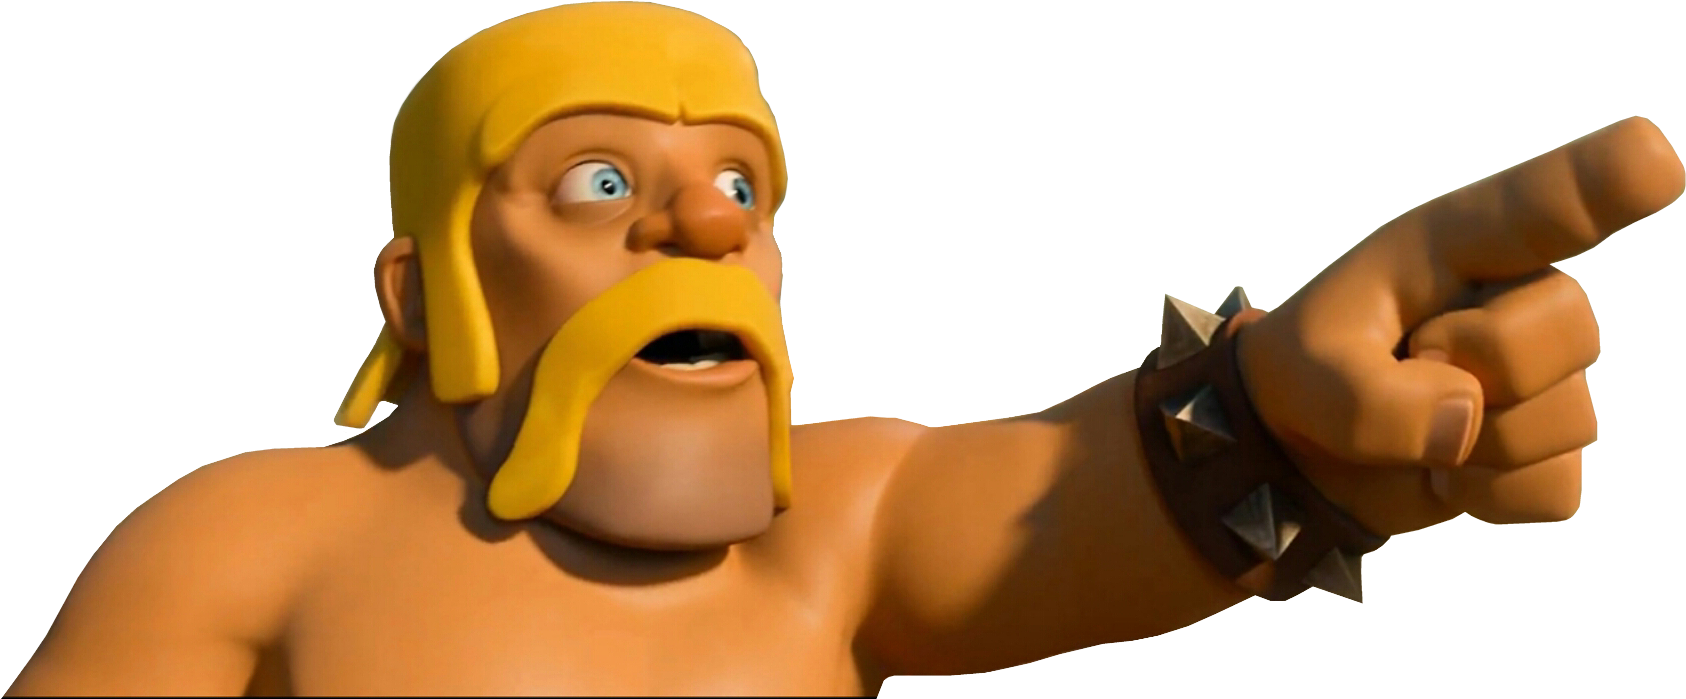 Clashof Clans Barbarian Pointing